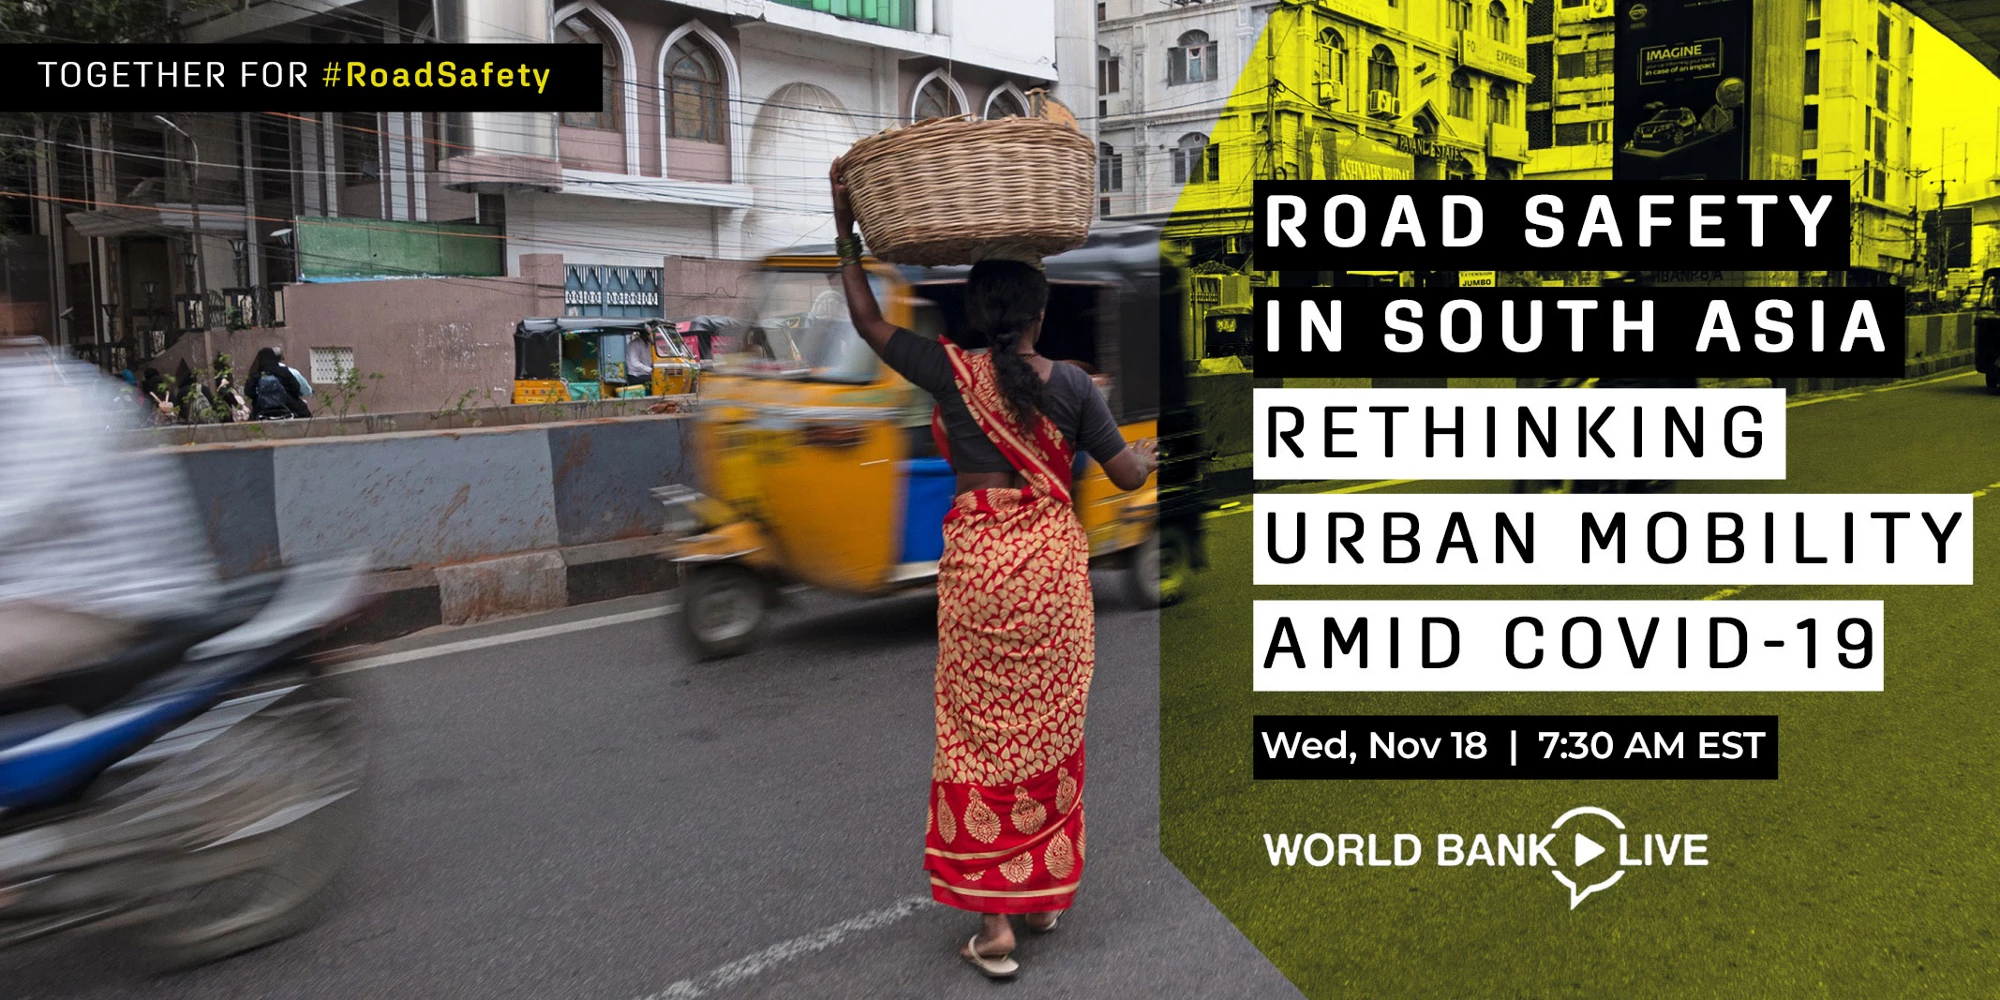 Road Safety in South Asia – Rethinking Urban Mobility amid COVID-19